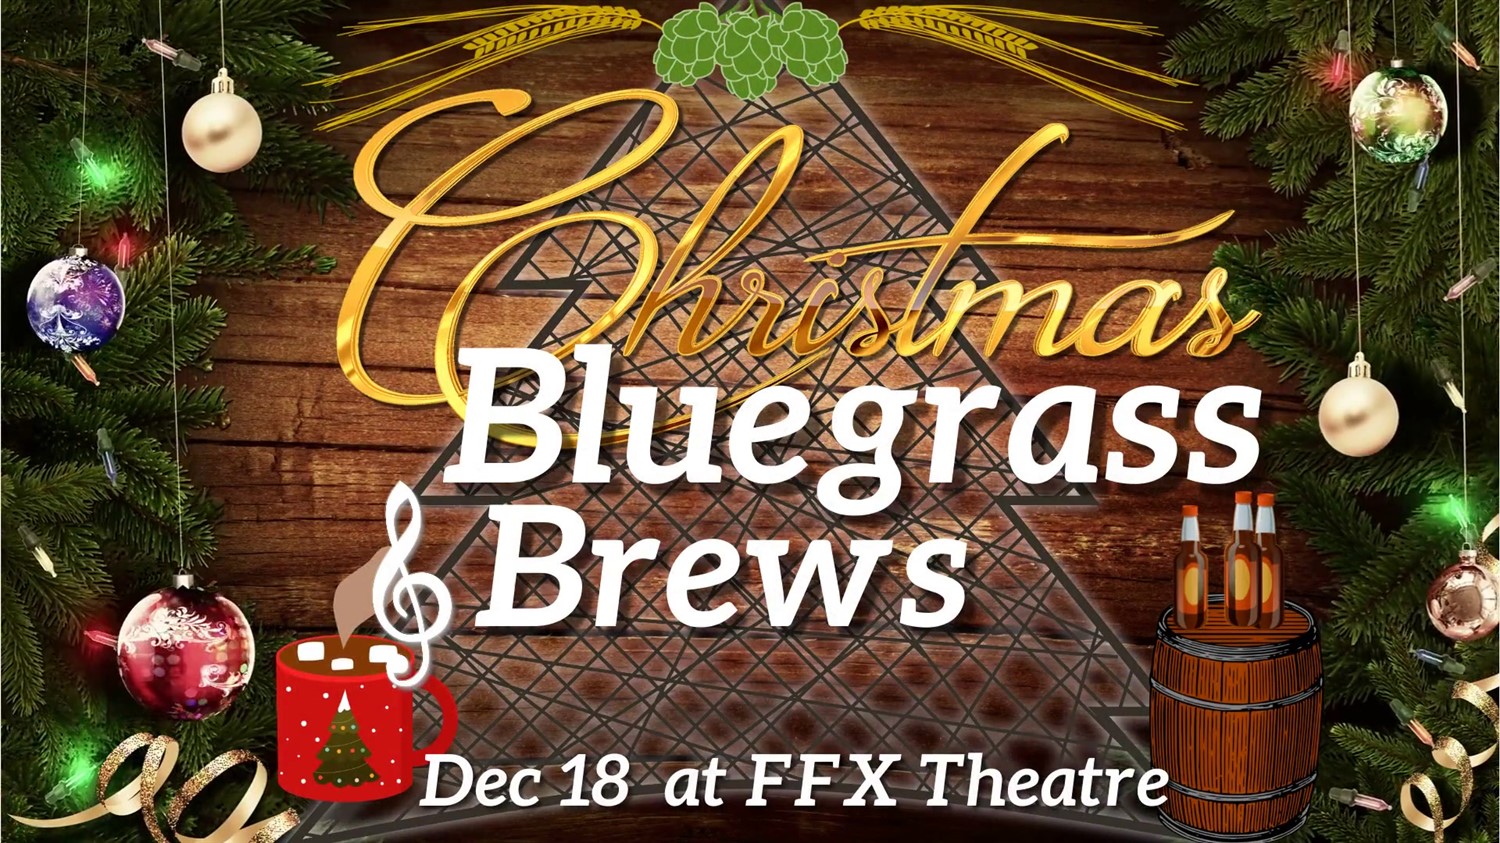 Christmas Bluegrass & Brews Live jam session with beers, coffee, cocoa, & more on dic. 18, 13:00@FFX Theatre - Compra entradas y obtén información enFamily Fun Xperience tickets.ffxshow.org